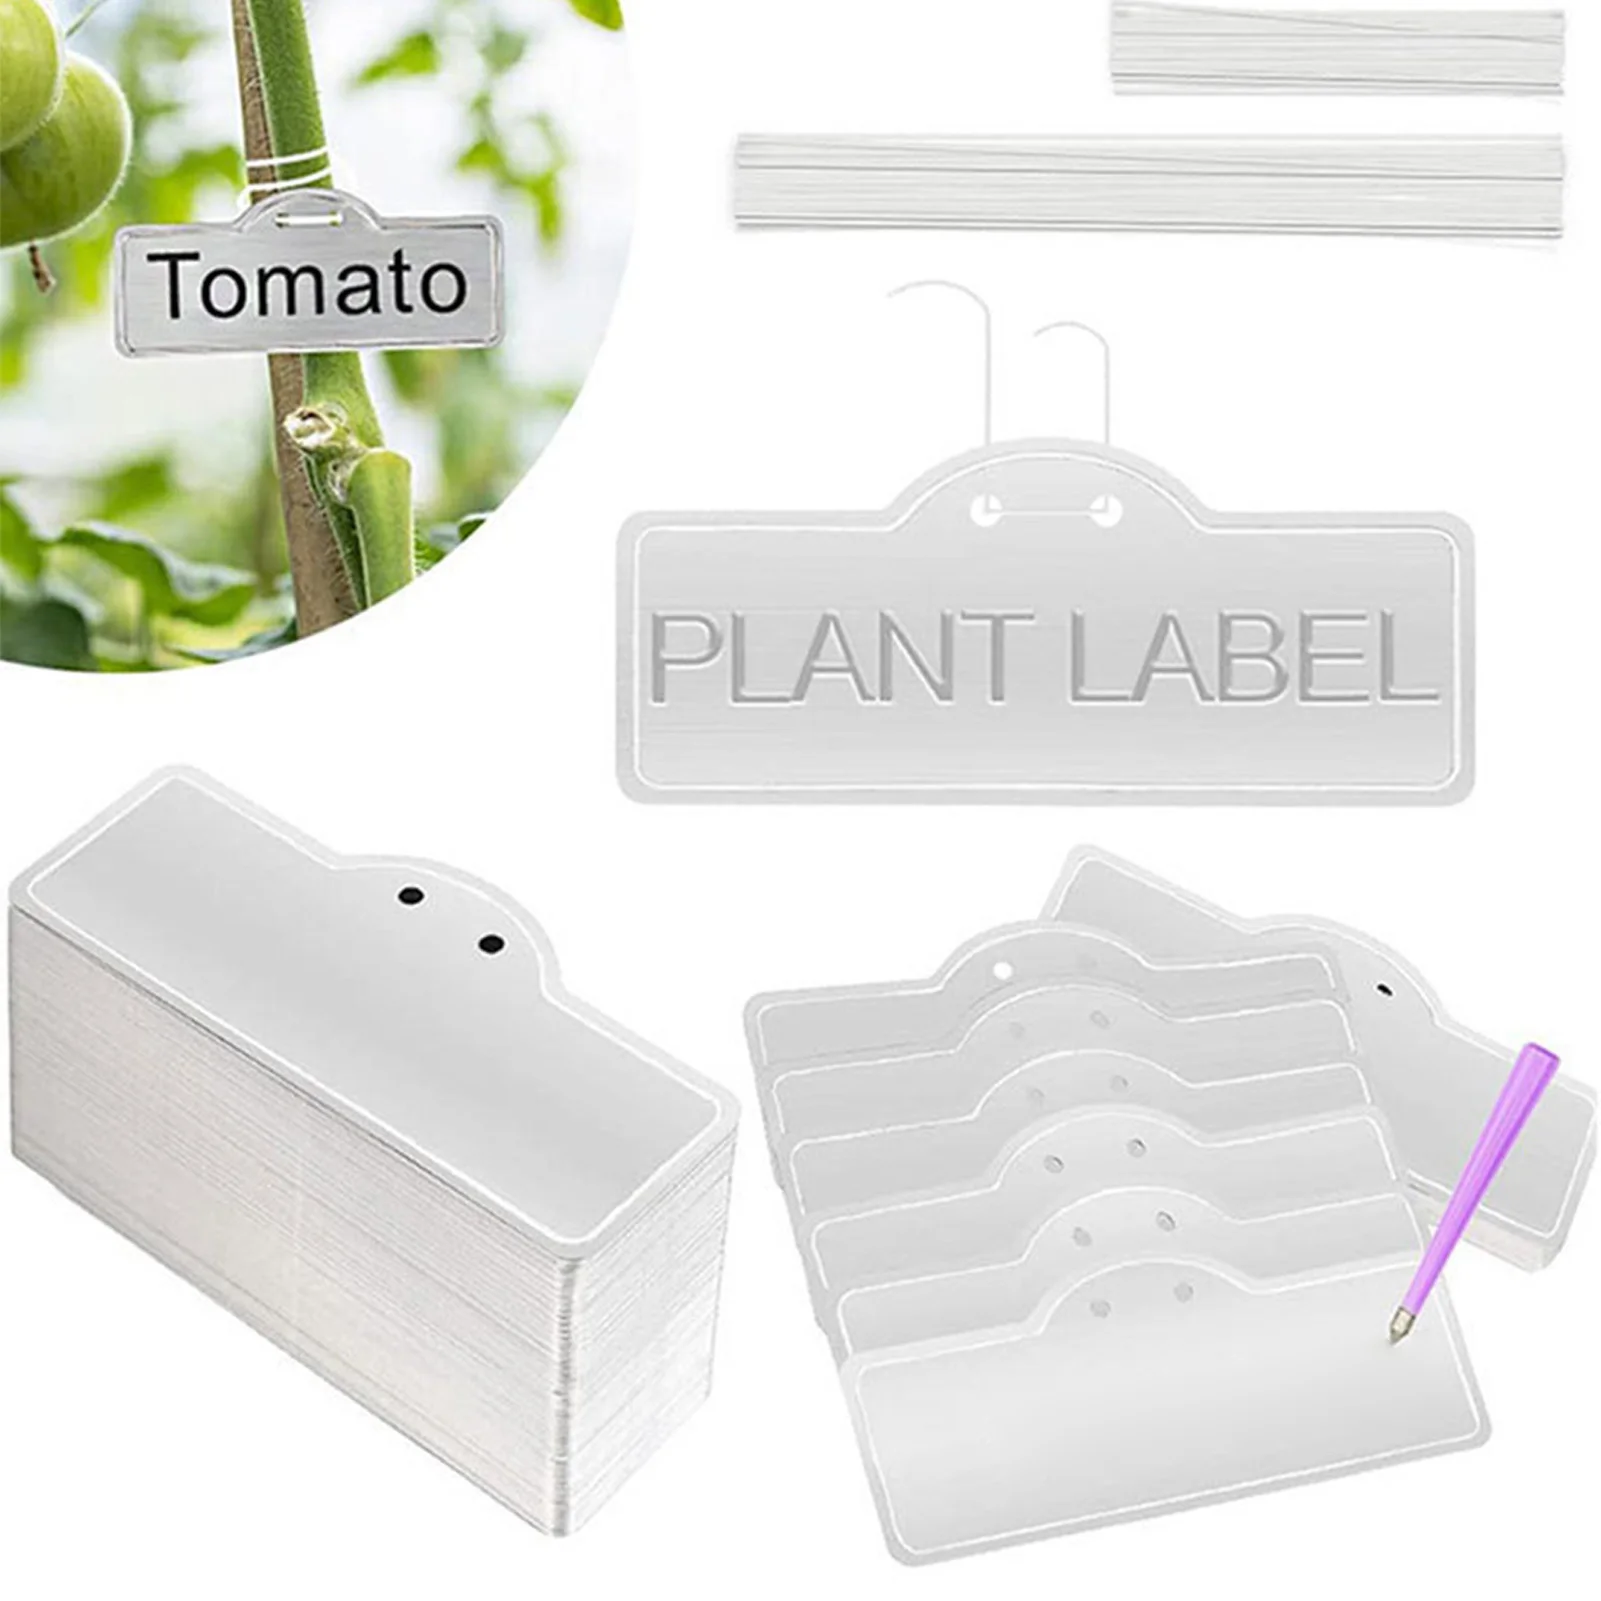 Aluminum Plant Labels Plant Tags Tree Tags Waterproof Pot Label Tags Marker With Wires for Indoor Outdoor Gardening Nursery